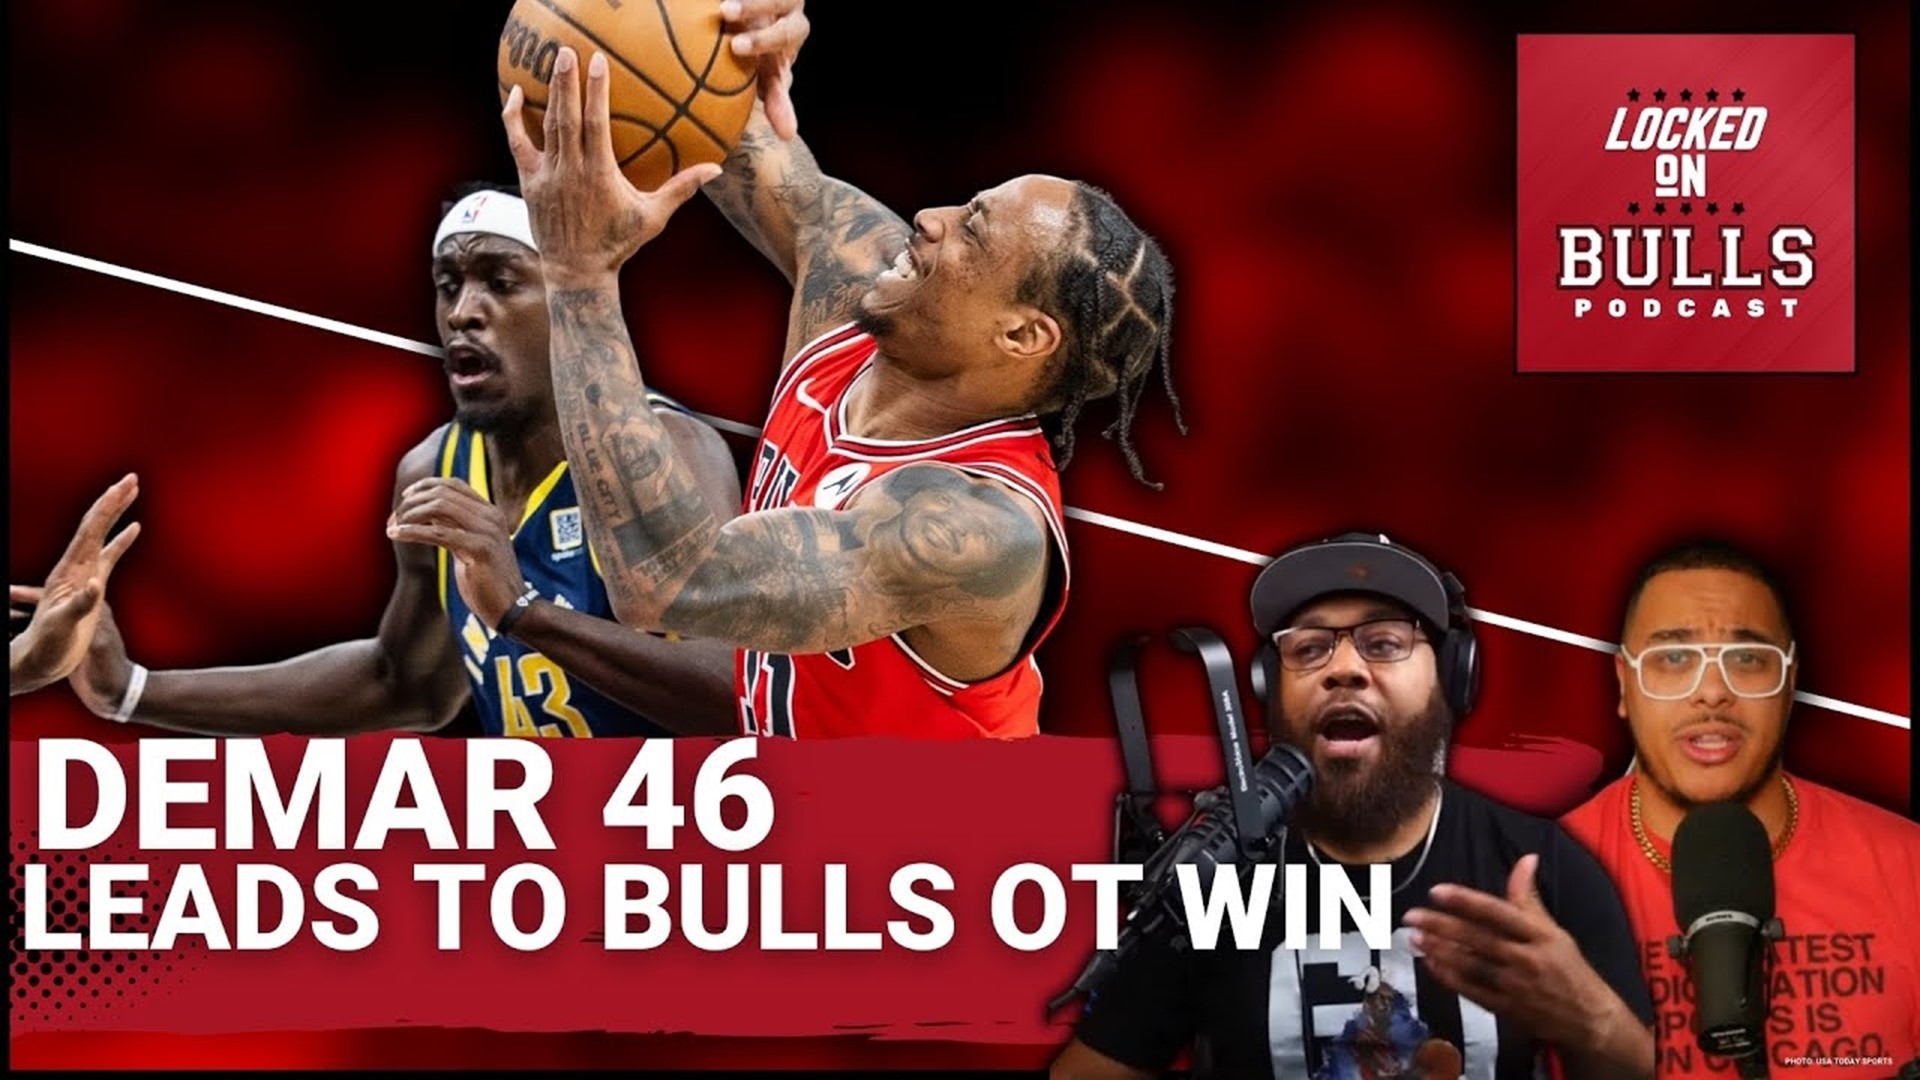 Haize & Pat The Designer discuss the Bulls OT victory over the Pacers & DeMar's 46 point night. The guys also talk about Coby White going down.